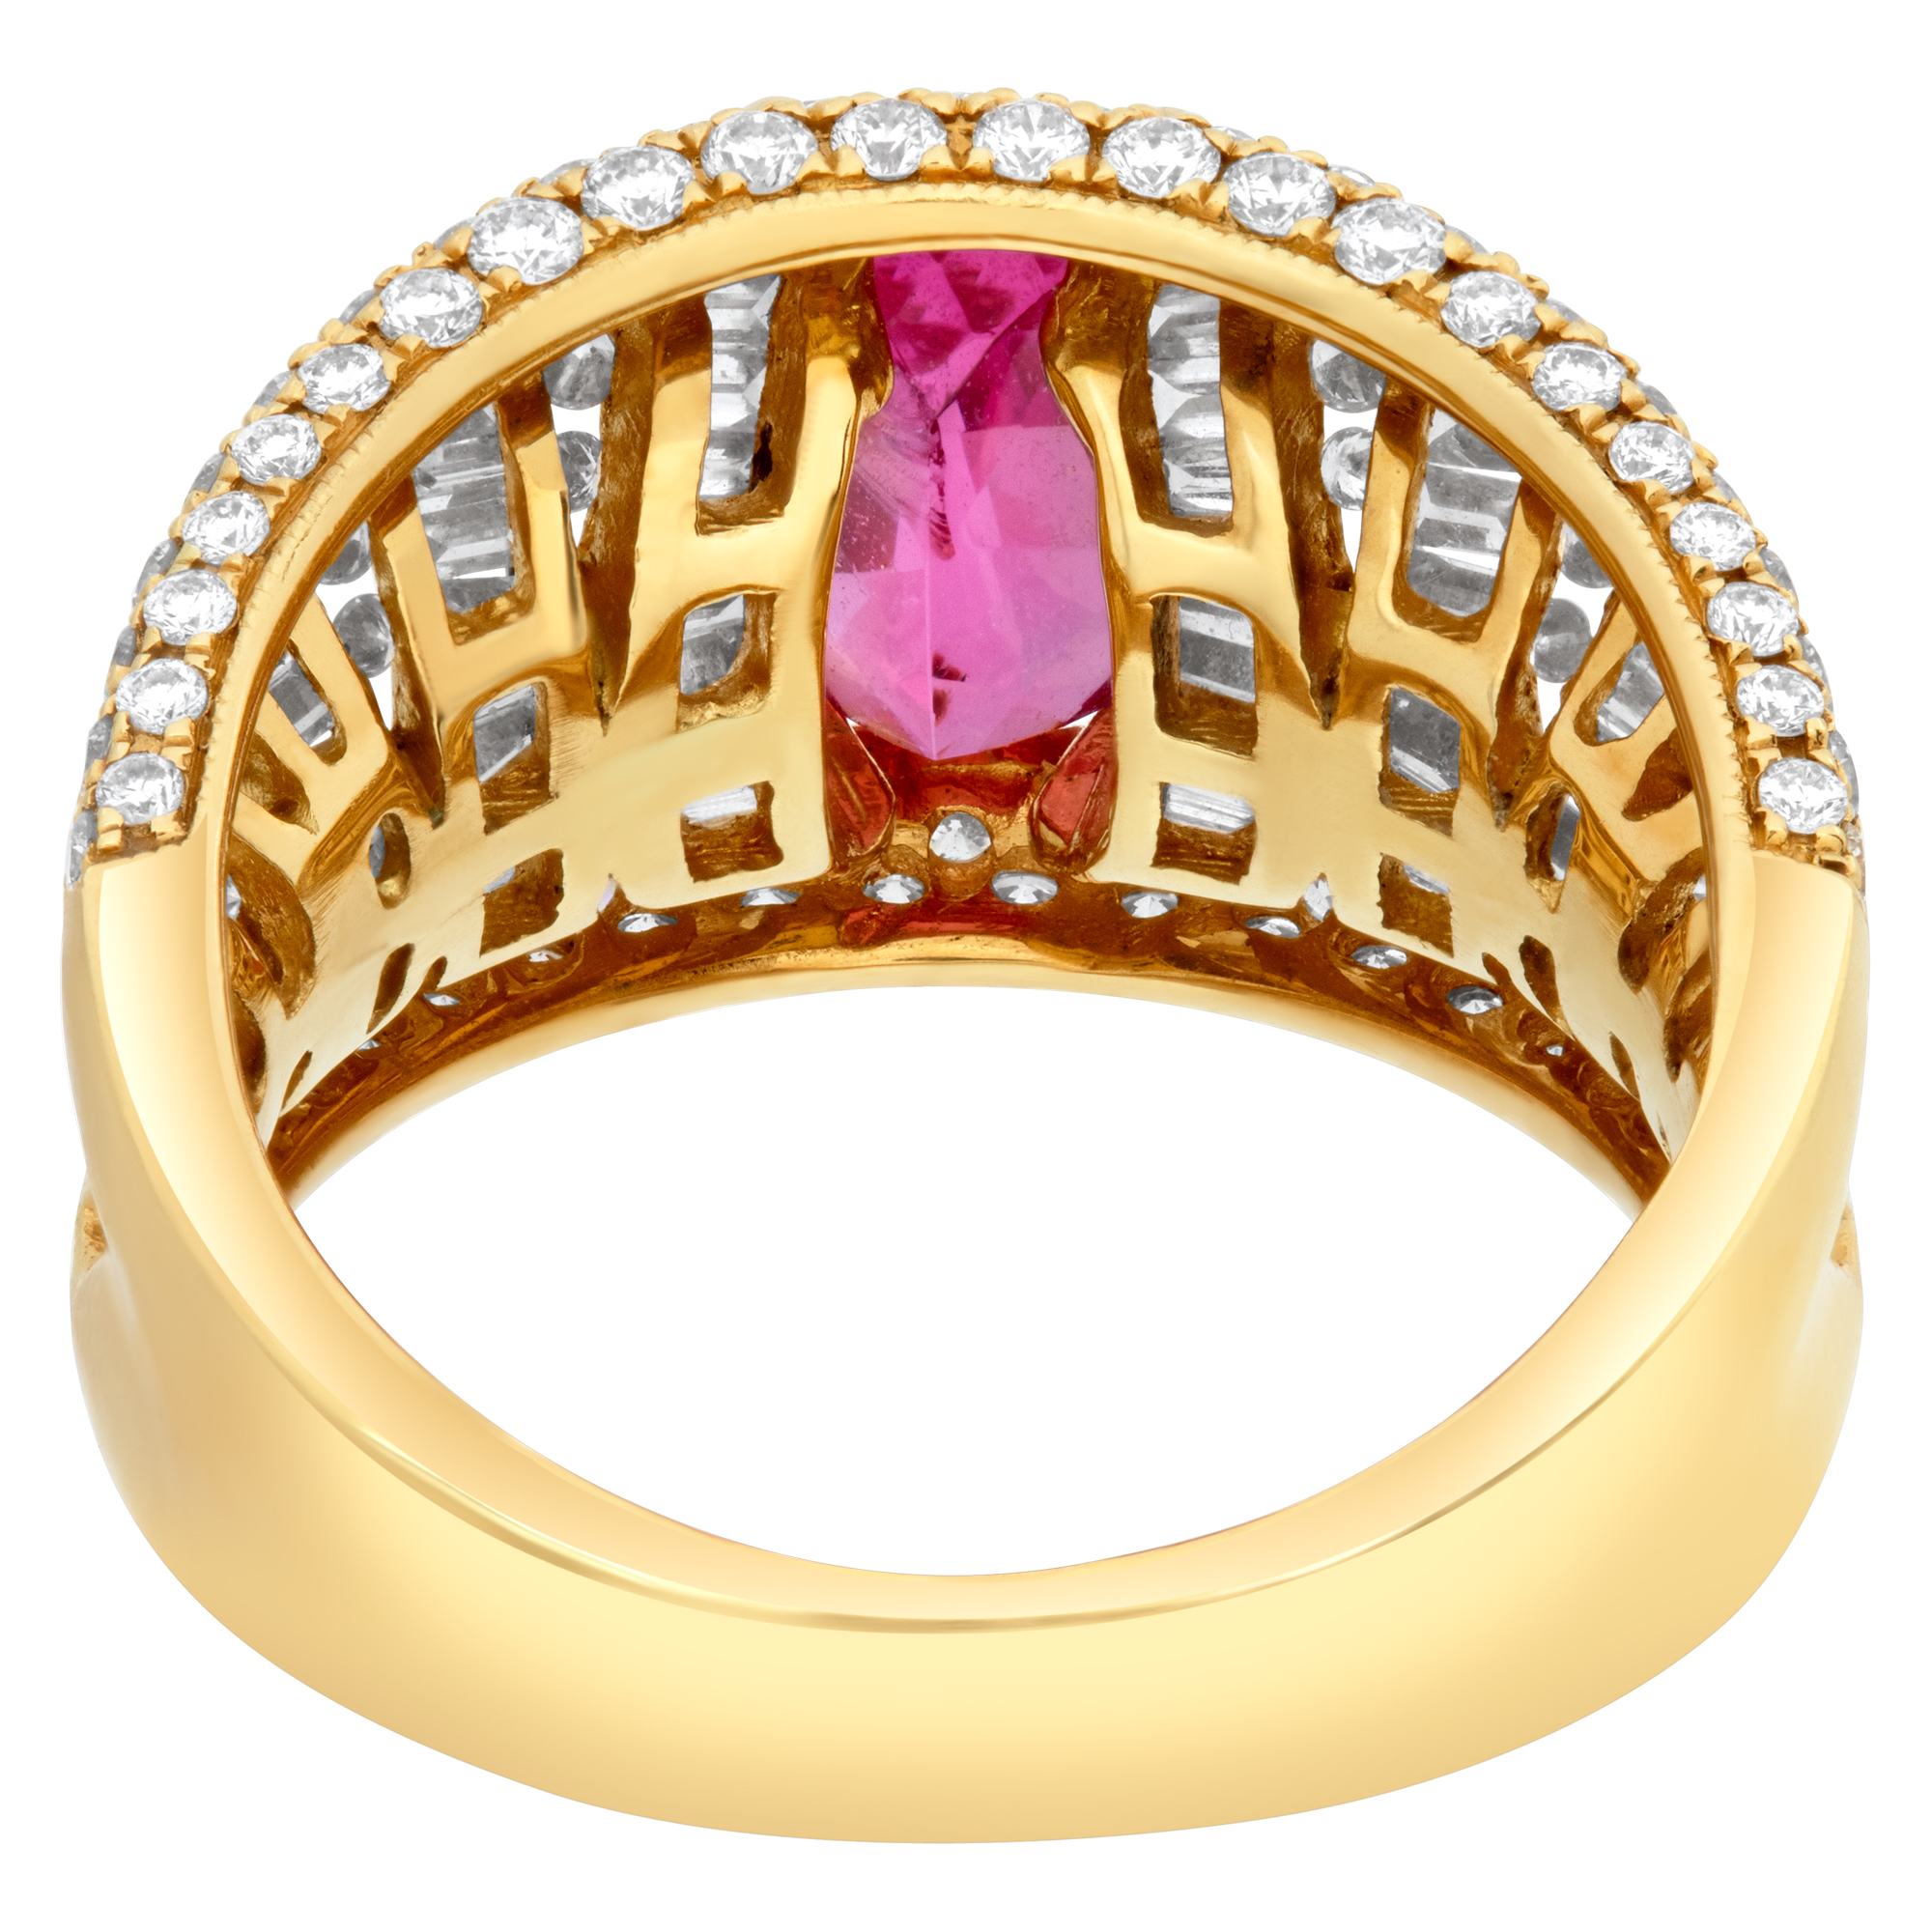 Oval brilliant cut pink spinel (2.73 carats) & diamonds ring set in 18k yellow gold image 4